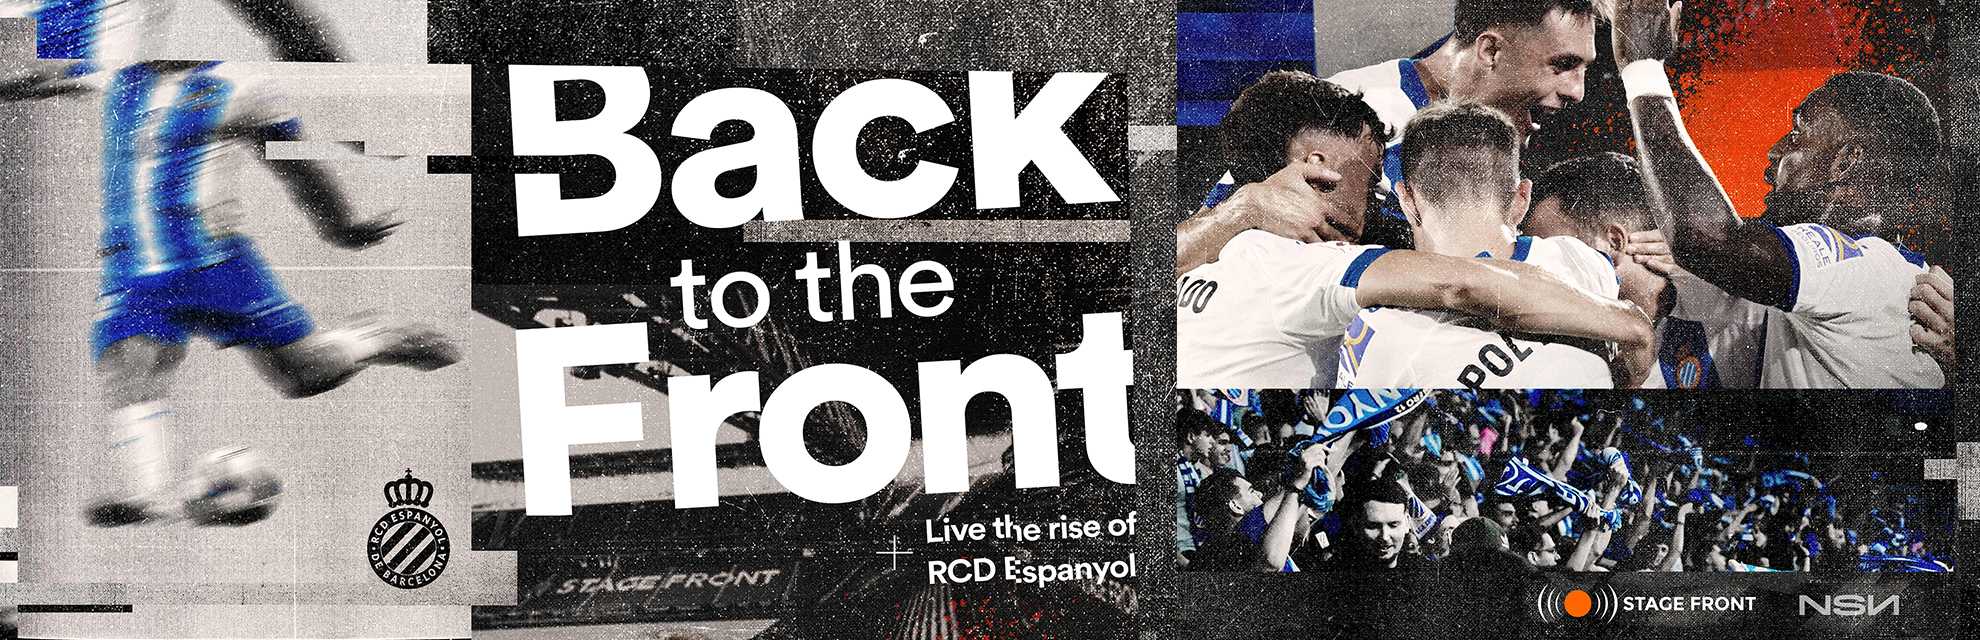 Stage Front and RCD Espanyol Debut Exclusive Inside Documentary Series: 'Back to the Front'